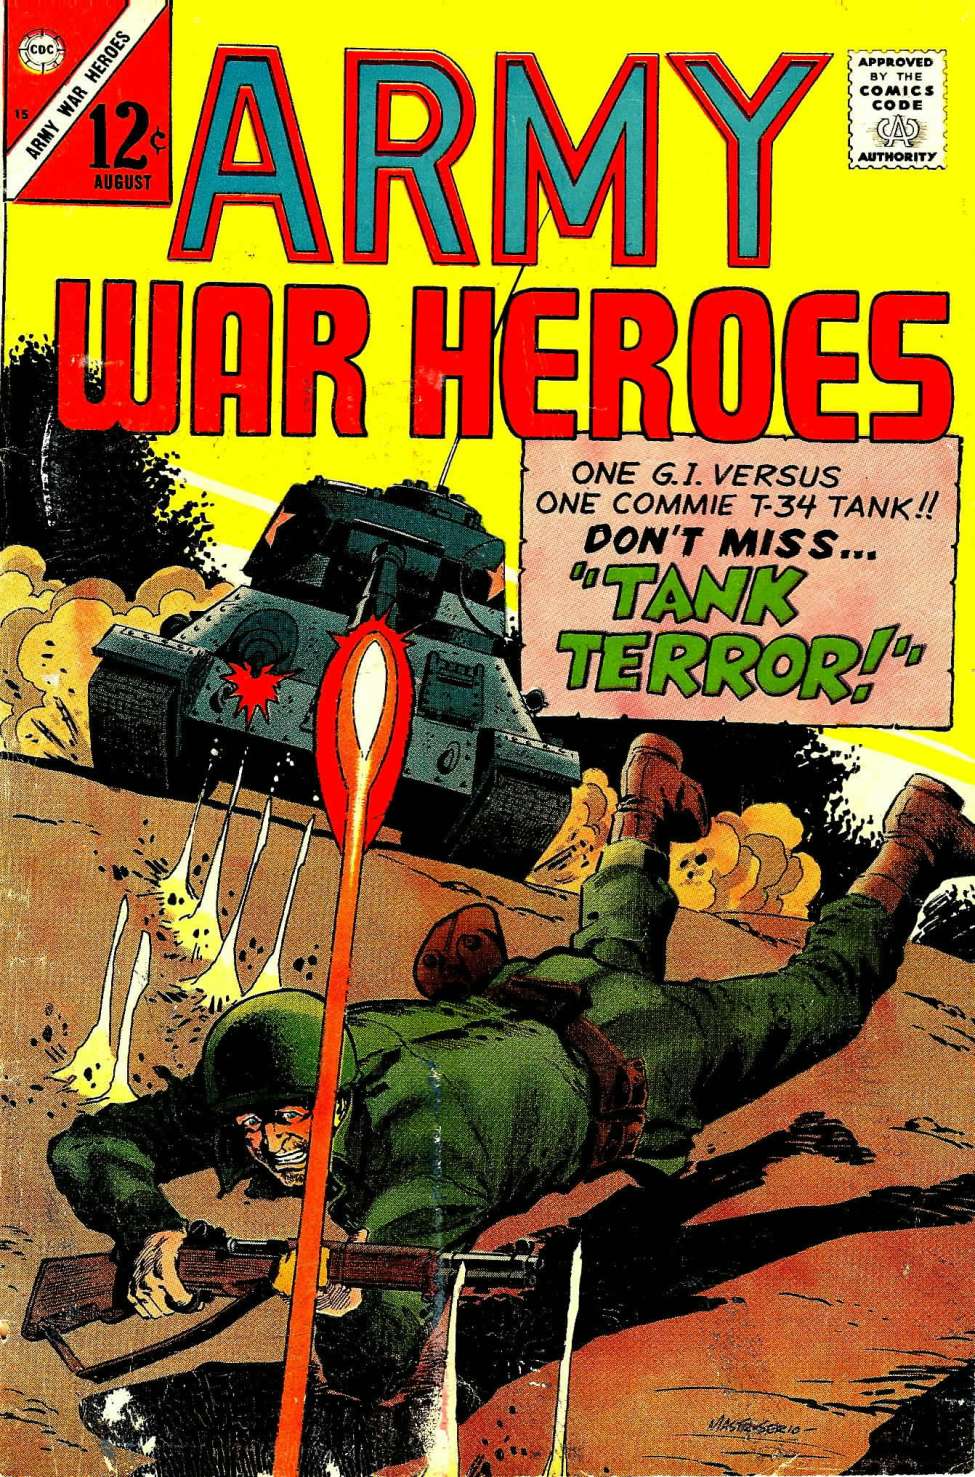 Book Cover For Army War Heroes 15